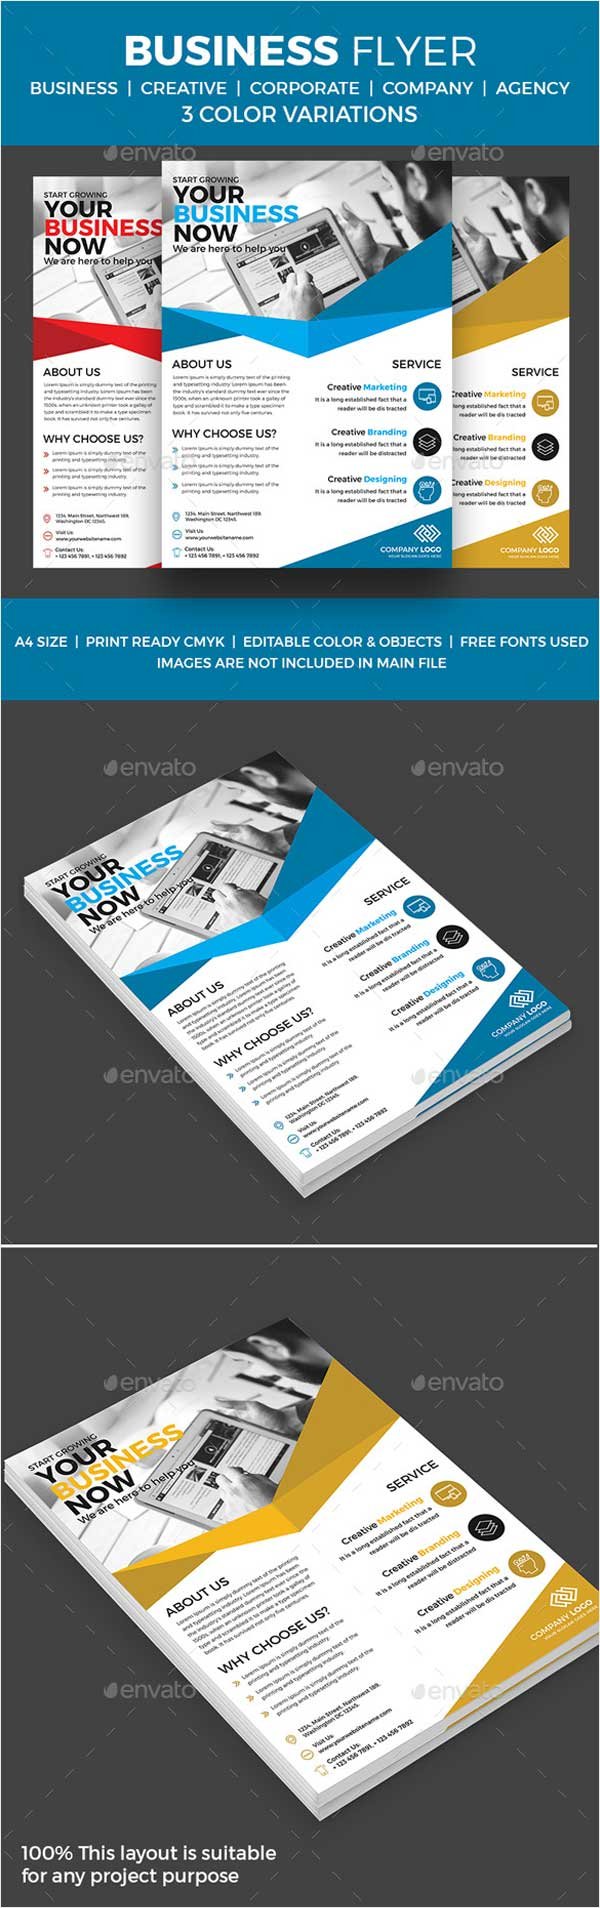 Business-Flyer-30